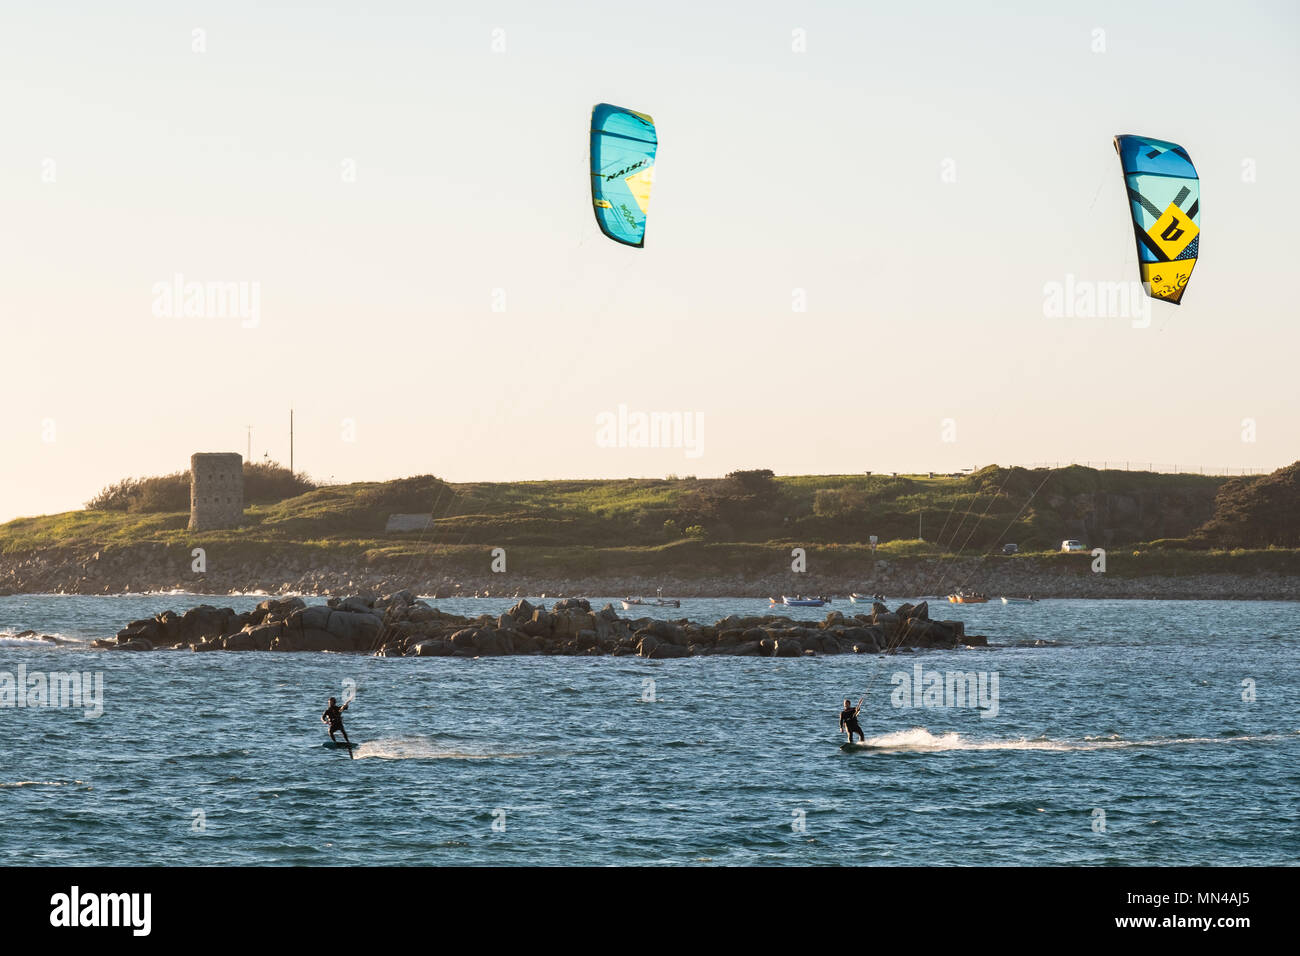 Les Amarreurs, Guernsey. 14th May, 2018. People enjoying kite surfing just before sunset in Les Amarreurs on the Channel Island of Guernsey on Monday, May 14, 2018. Credit: Christopher Middleton/Alamy Live News Stock Photo